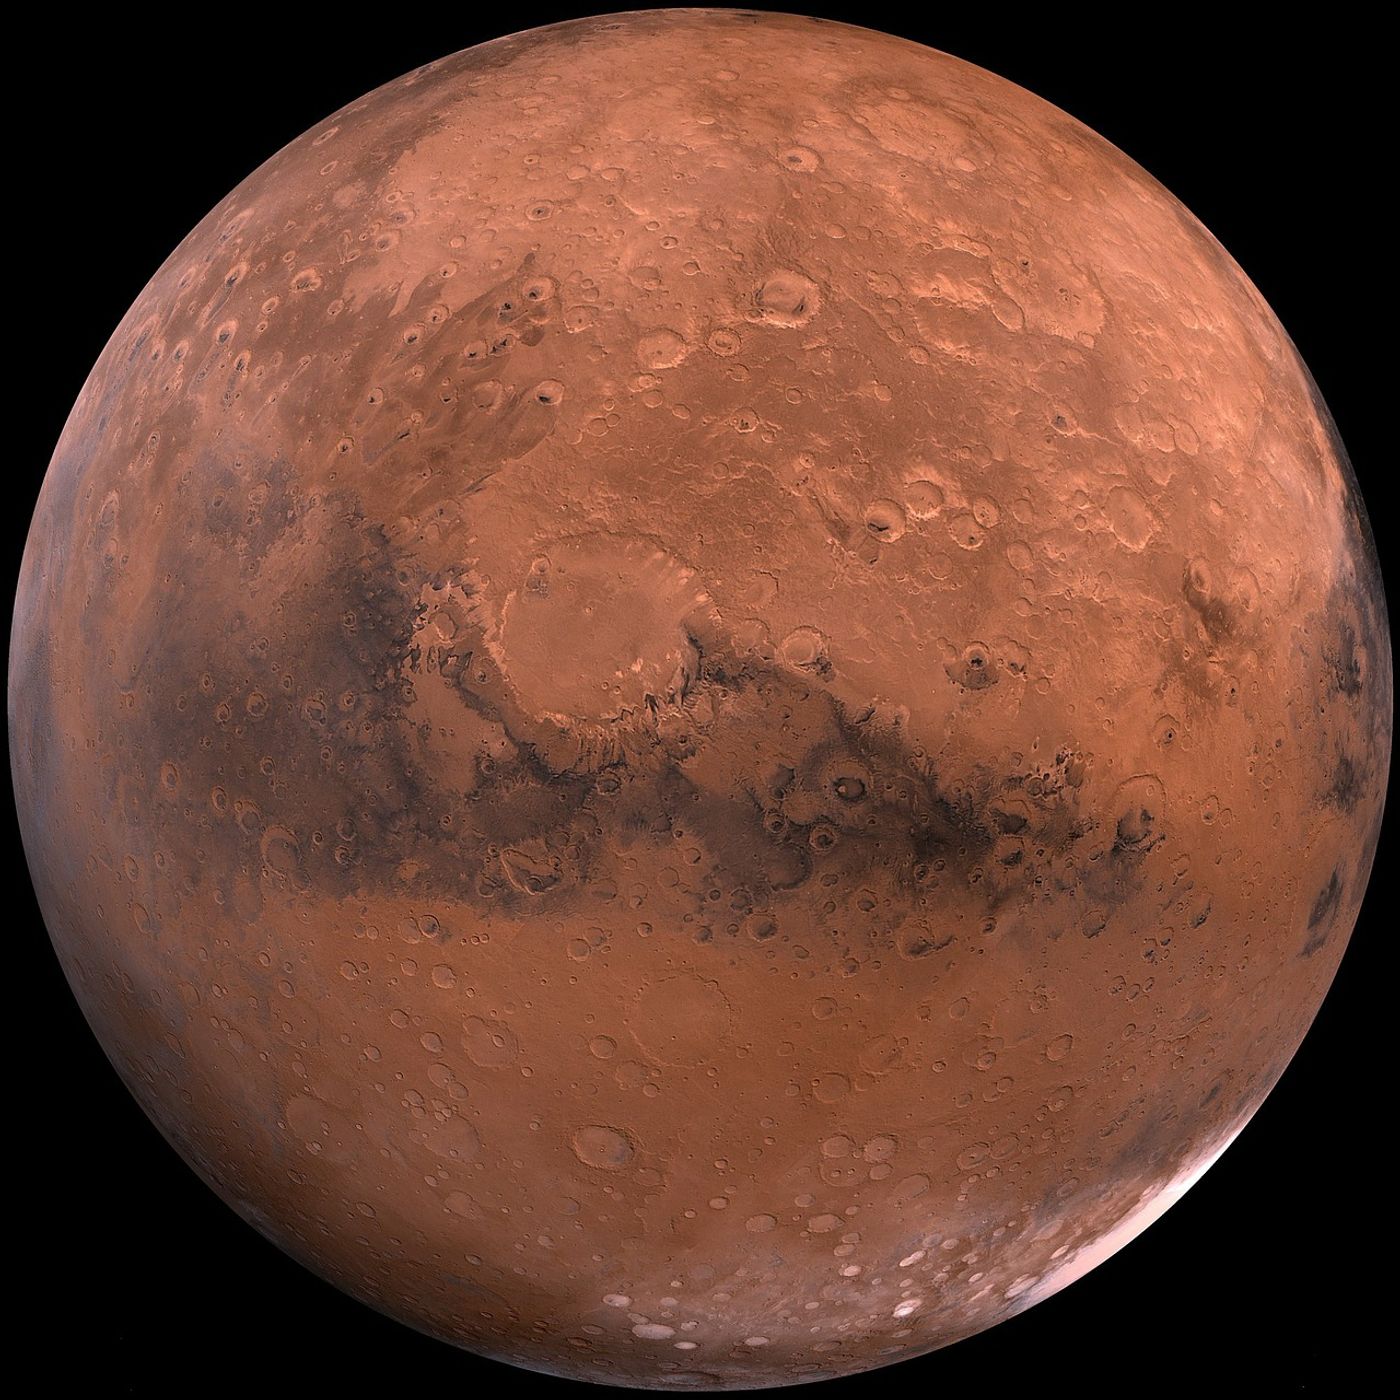 Mars isn't habitable in its current form, but could we ever change that?